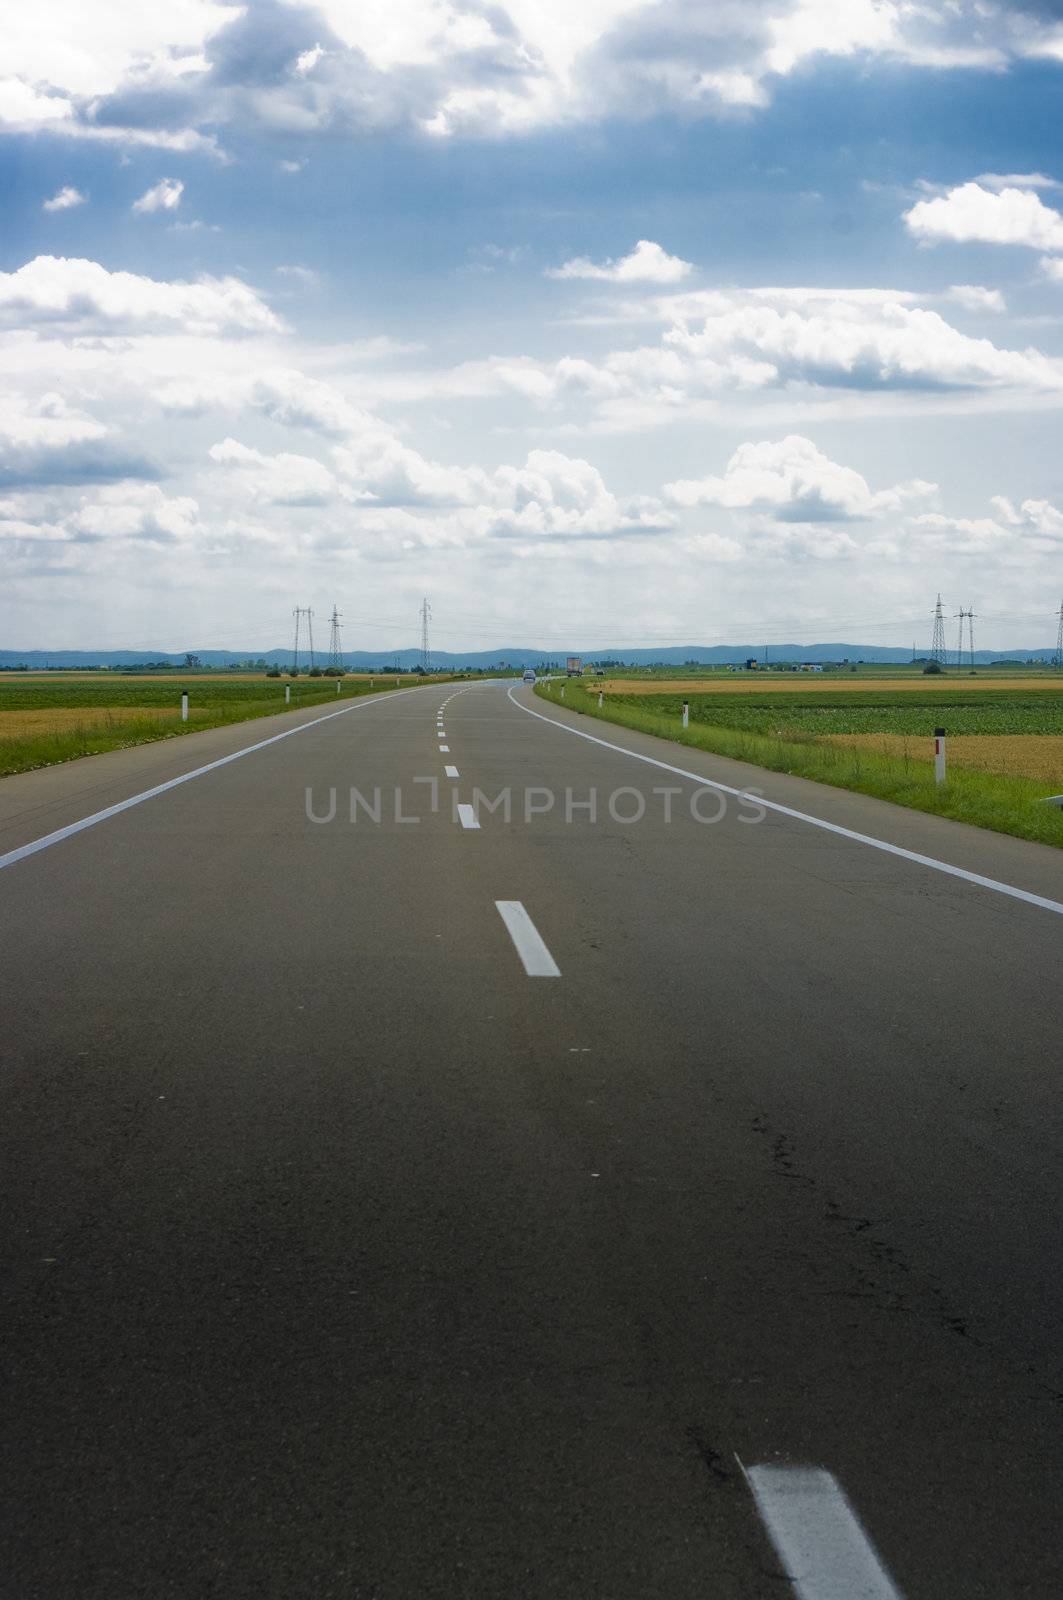 Highway by photo4dreams